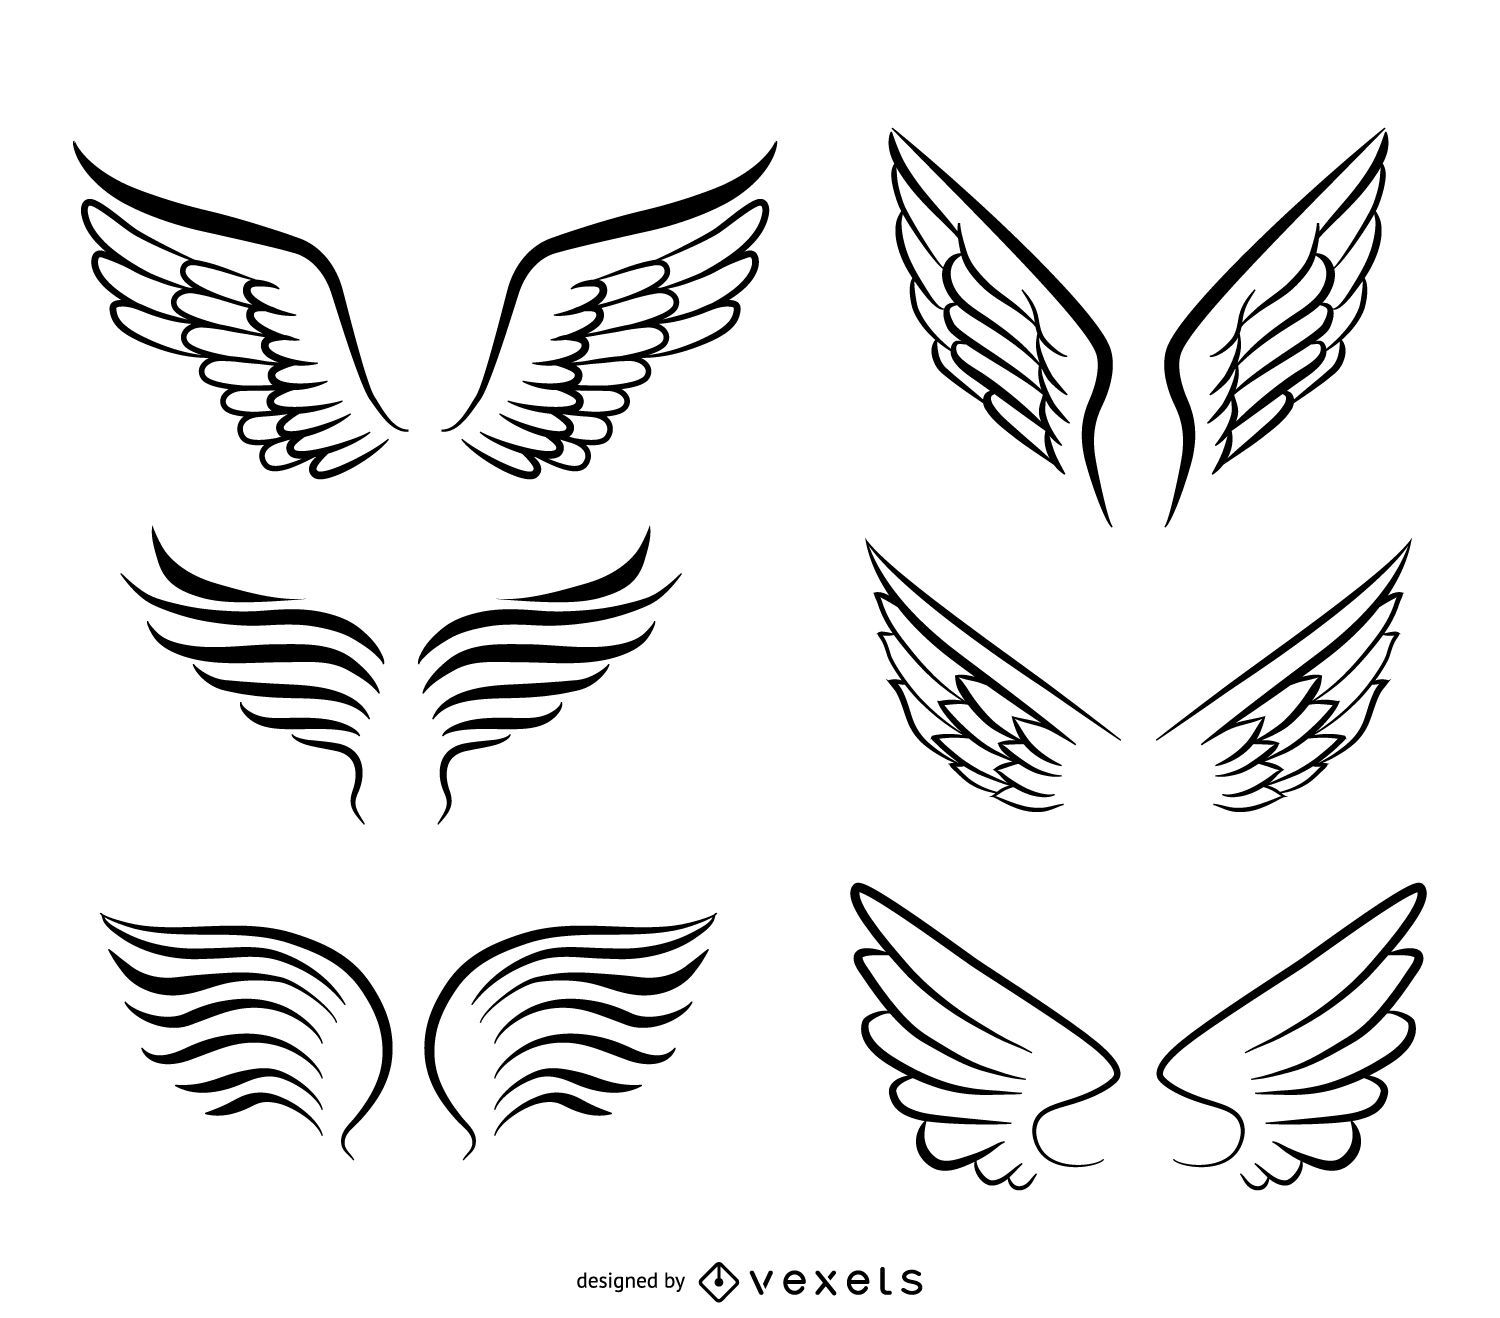 free vector clipart wings - photo #22